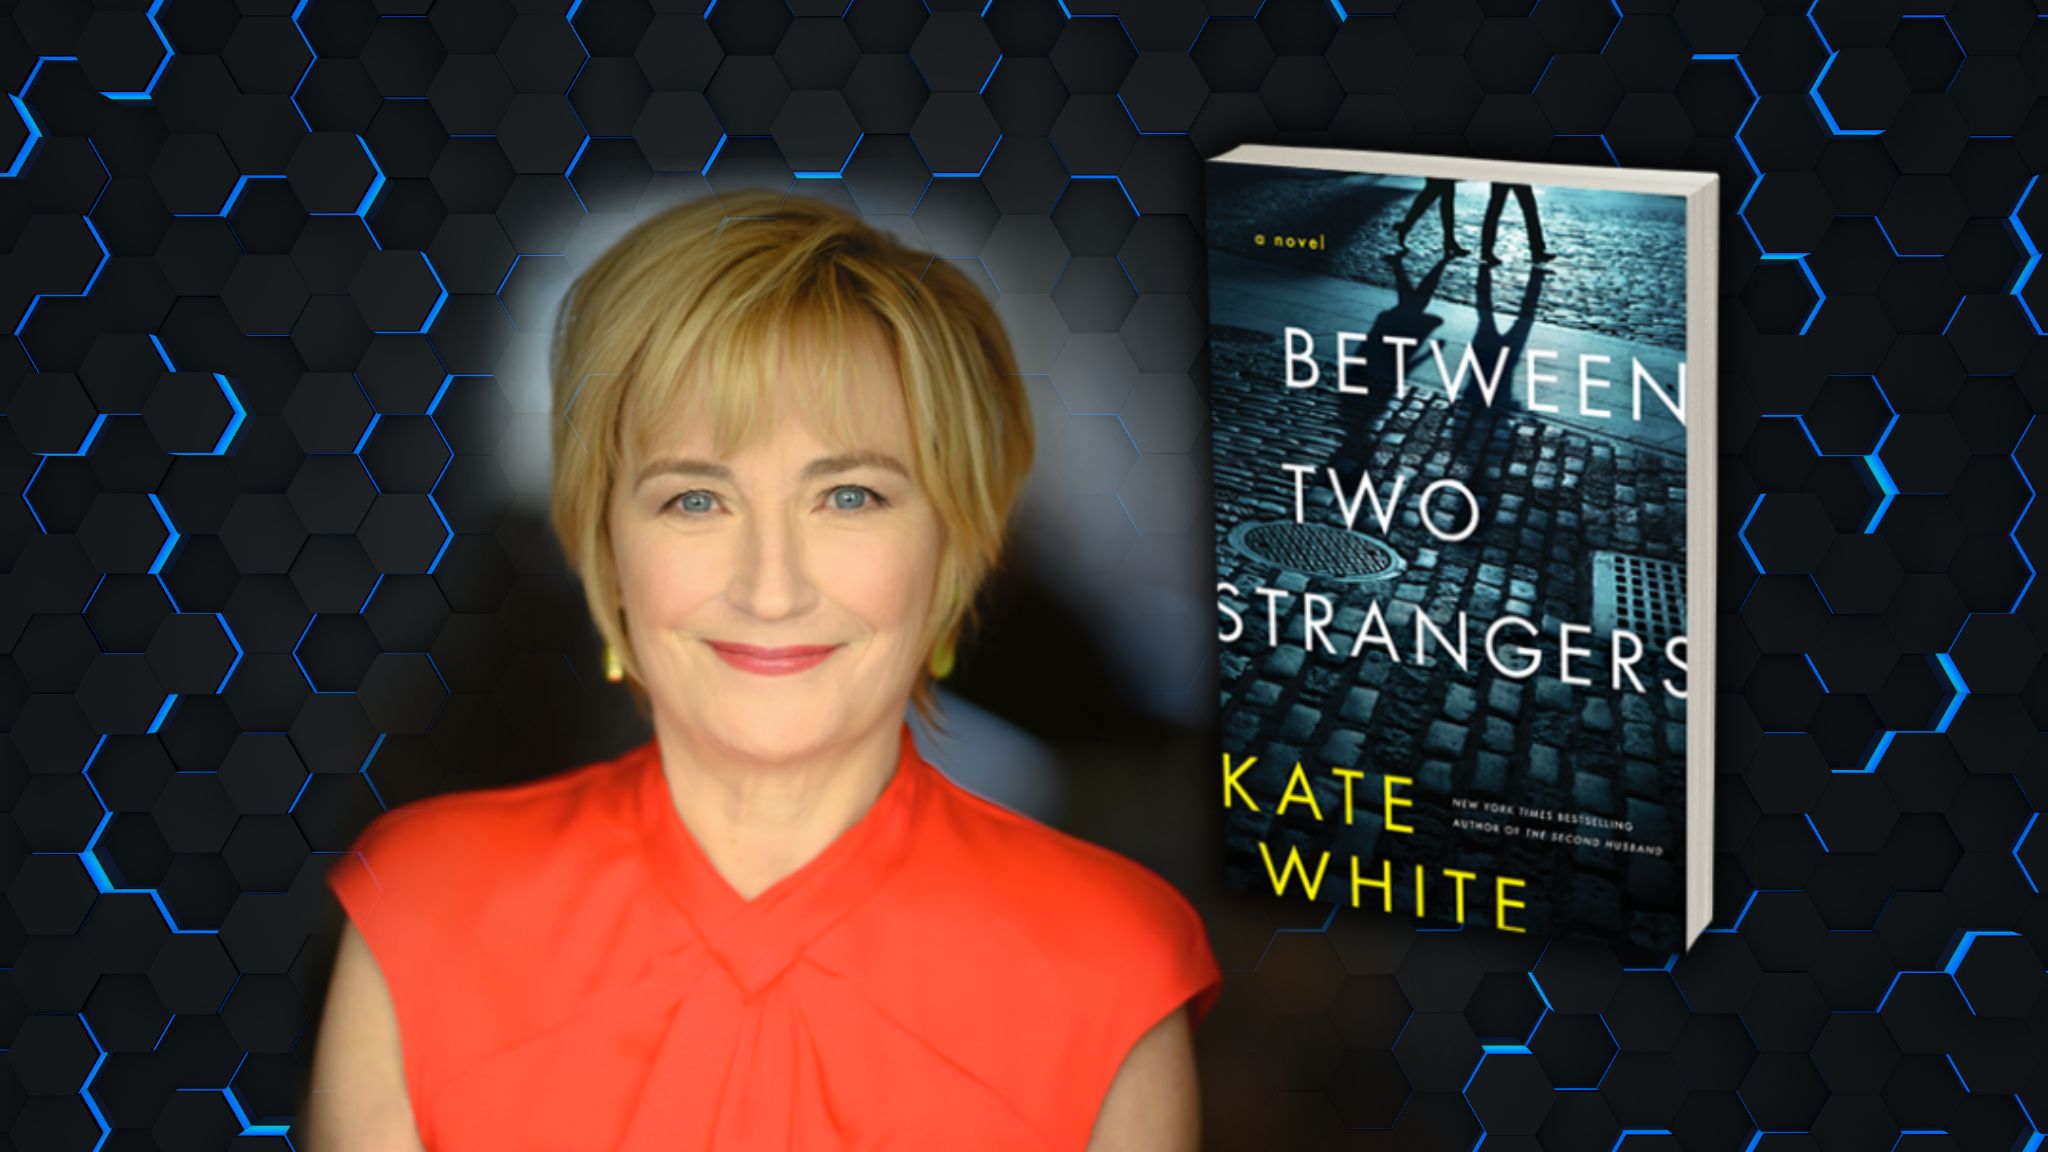 Bestselling Author Shares Inspiration for New Thriller That Will Test Your Moral Compass BookTrib.